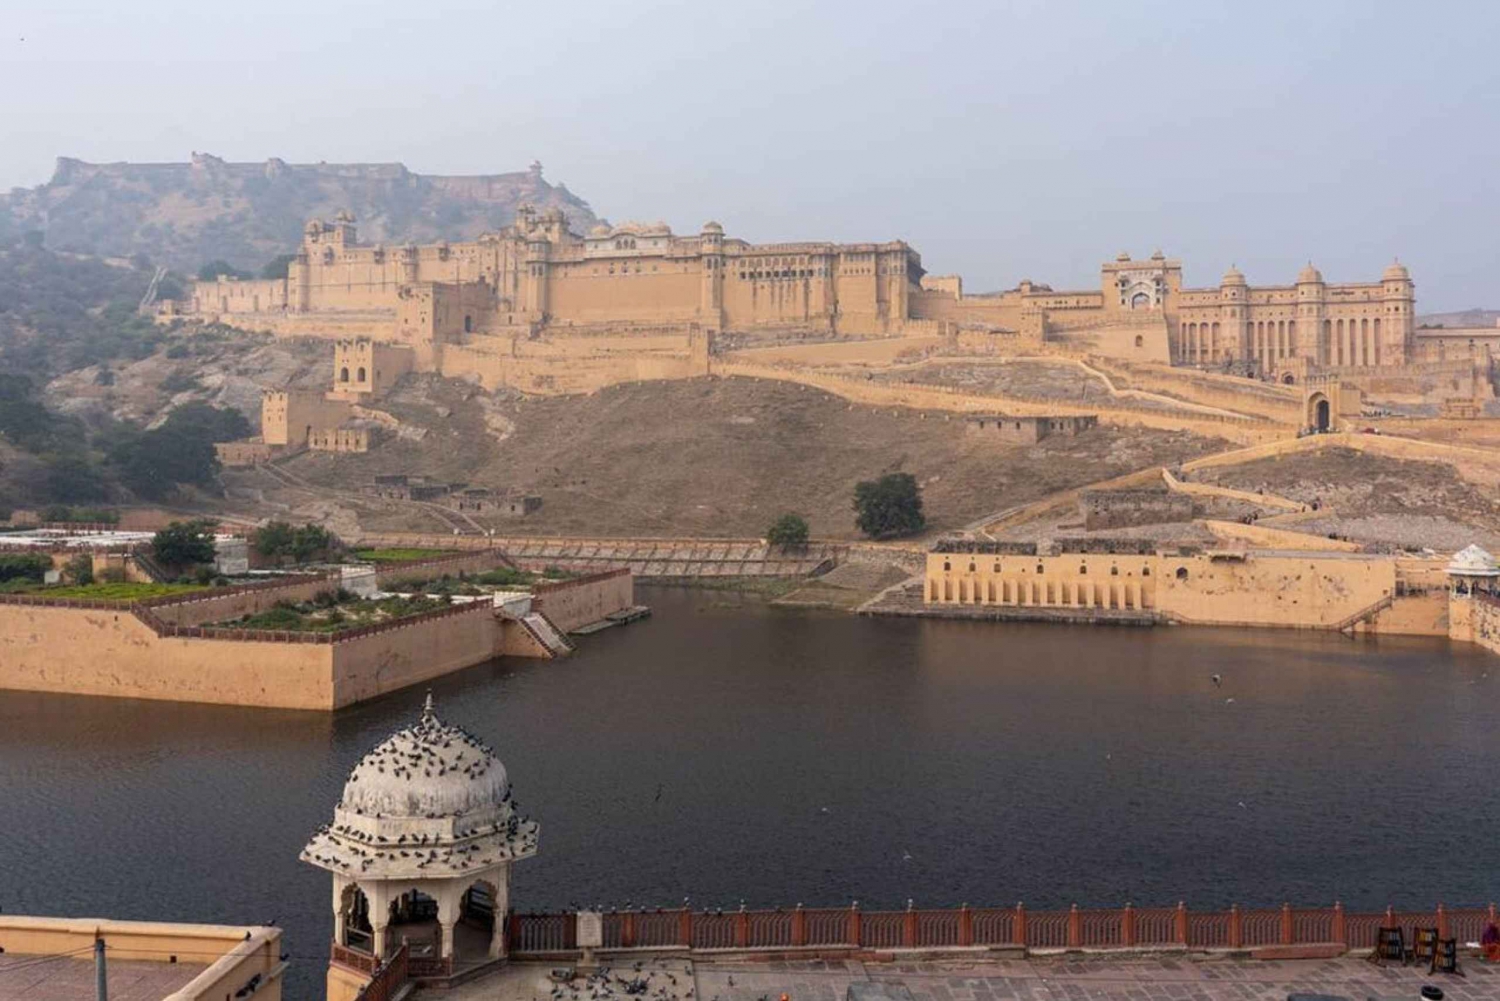 Full Day Jaipur Sightseeing Tour With Car and Guide